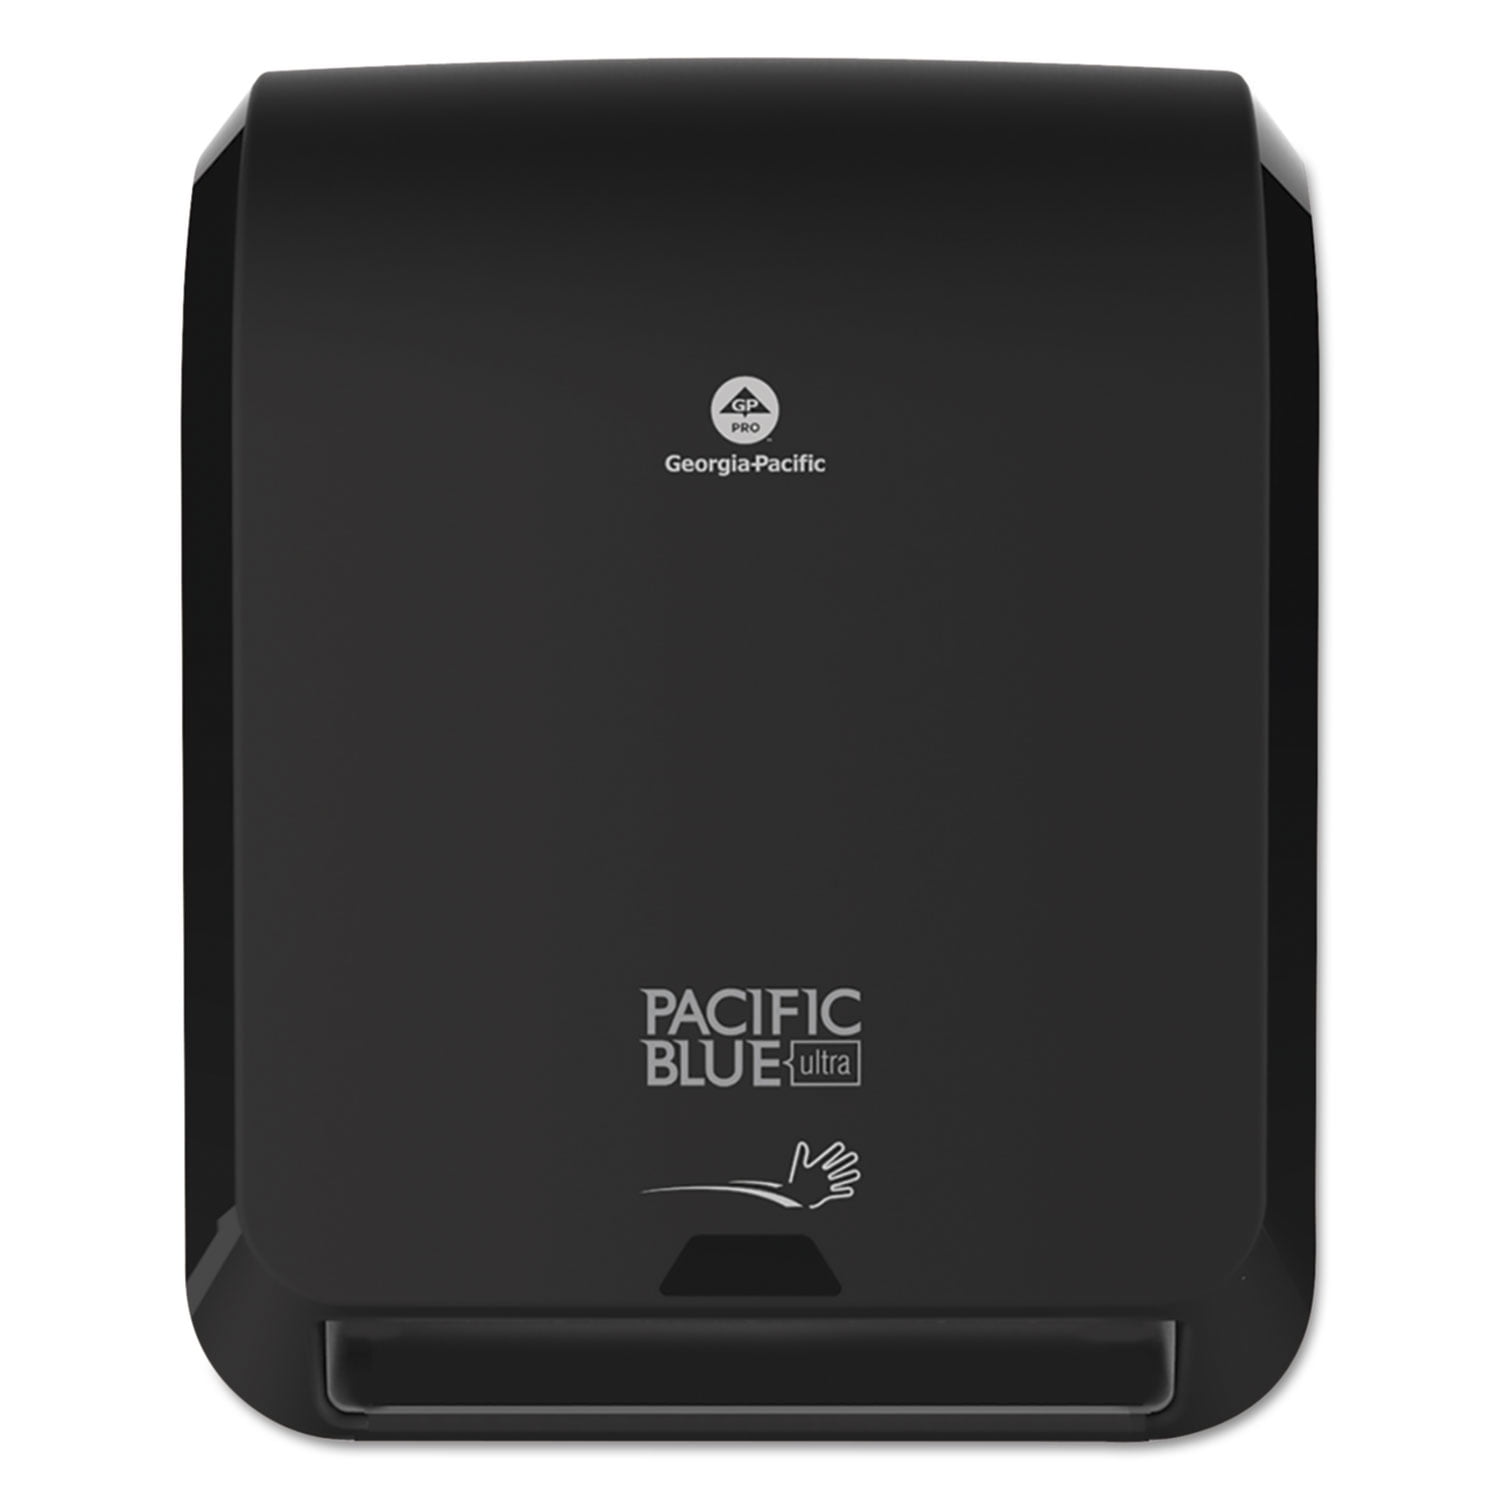 $59 for a Touchless Paper-Towel Dispenser